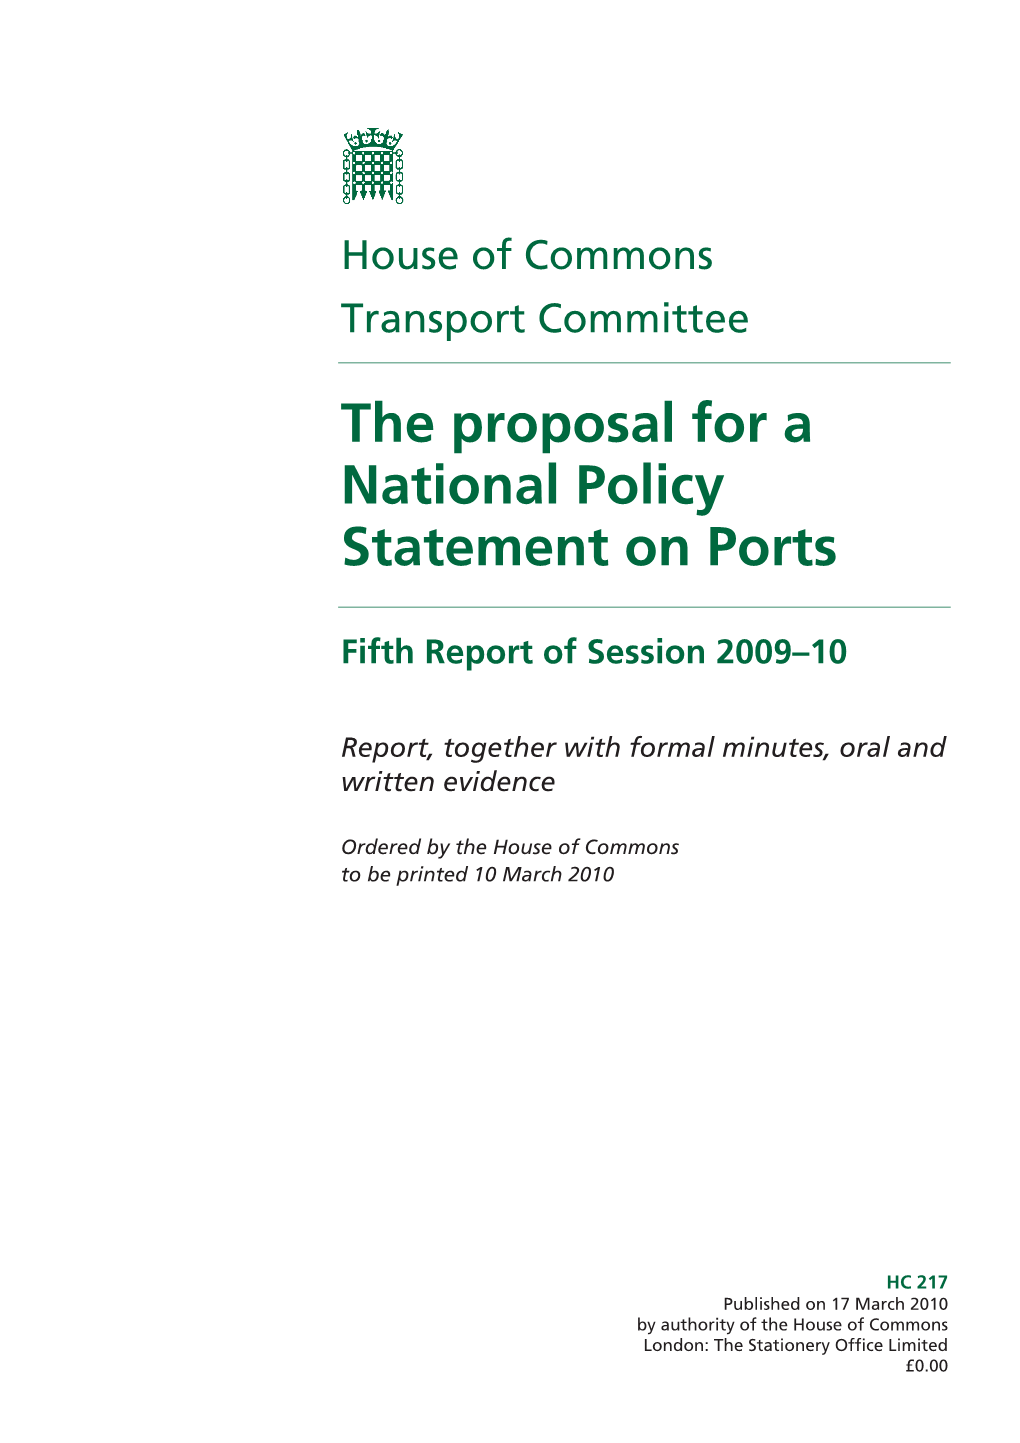 The Proposal for a National Policy Statement on Ports